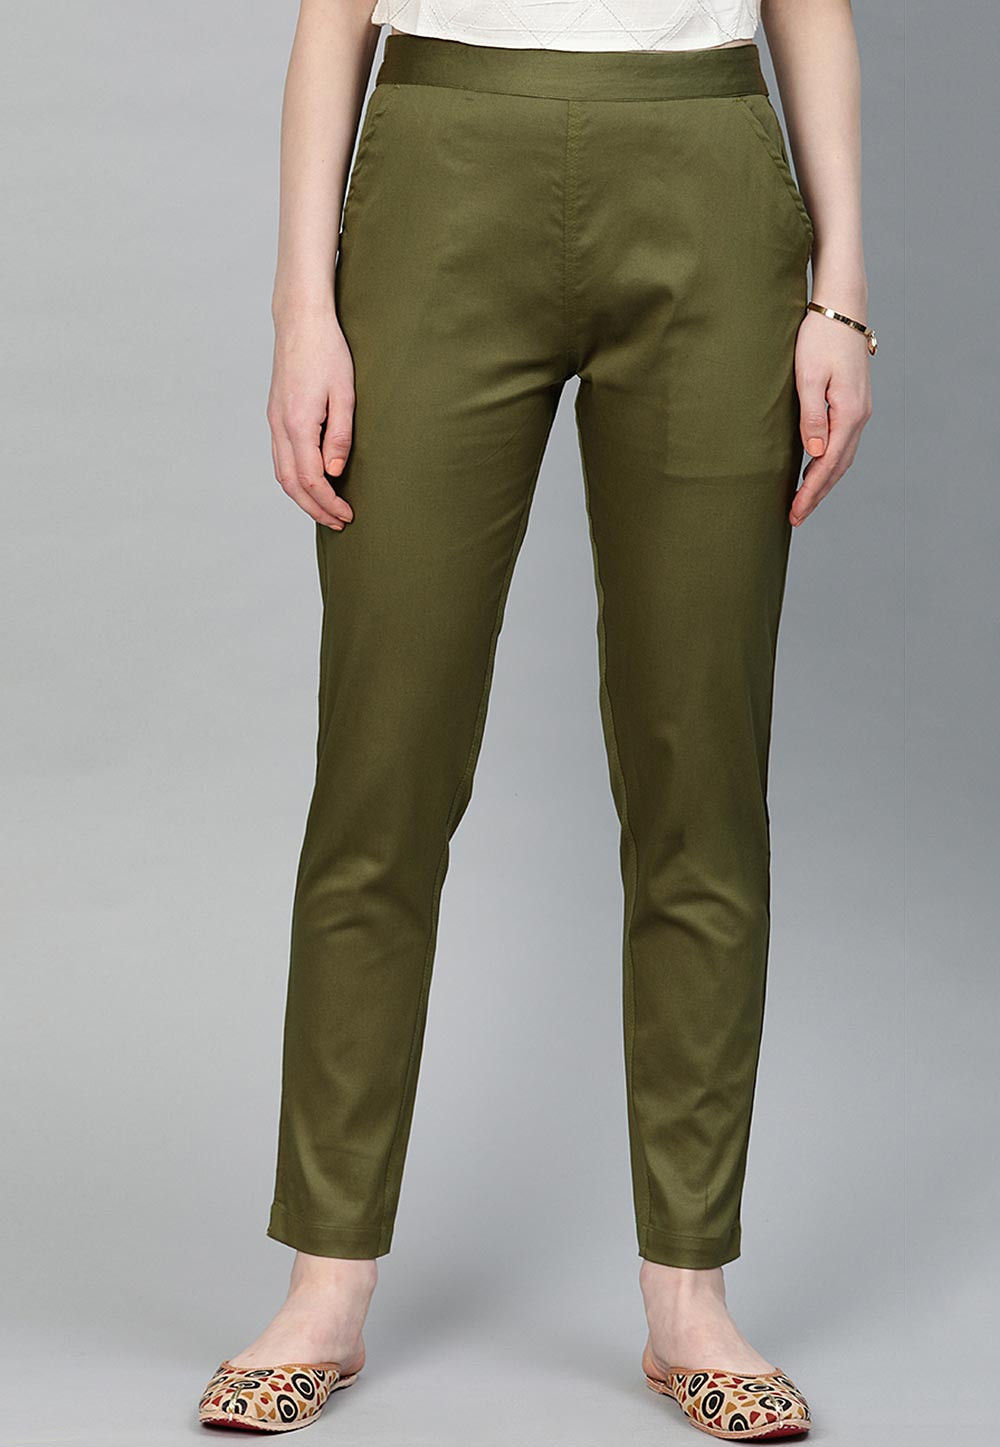 solid color cotton pant in olive green v1